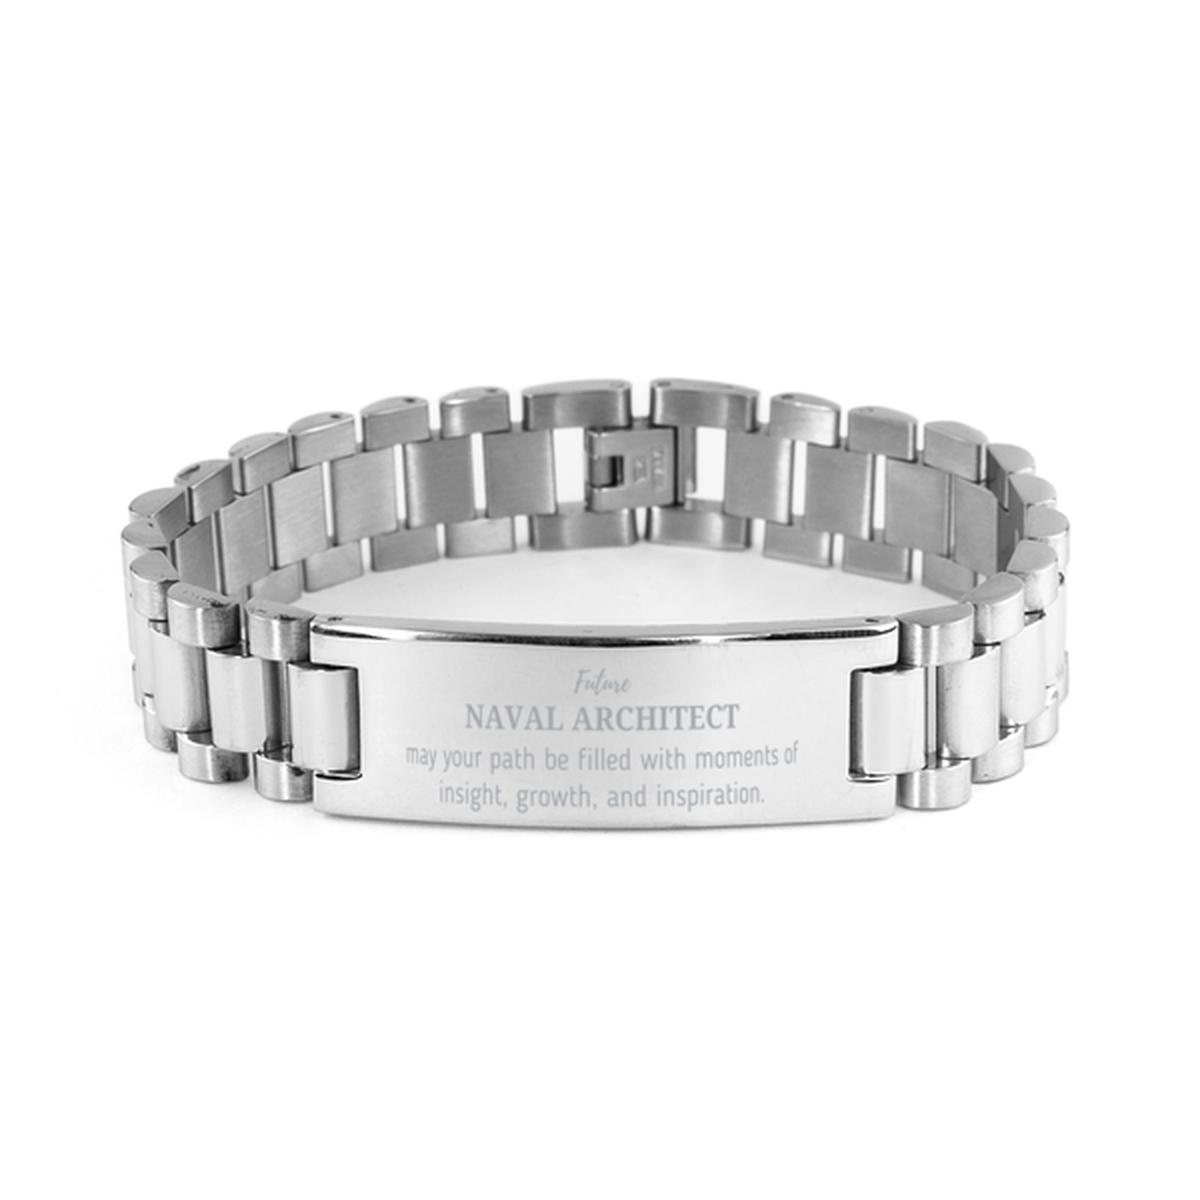 Future Naval Architect Gifts, May your path be filled with moments of insight, Graduation Gifts for New Naval Architect, Christmas Unique Ladder Stainless Steel Bracelet For Men, Women, Friends